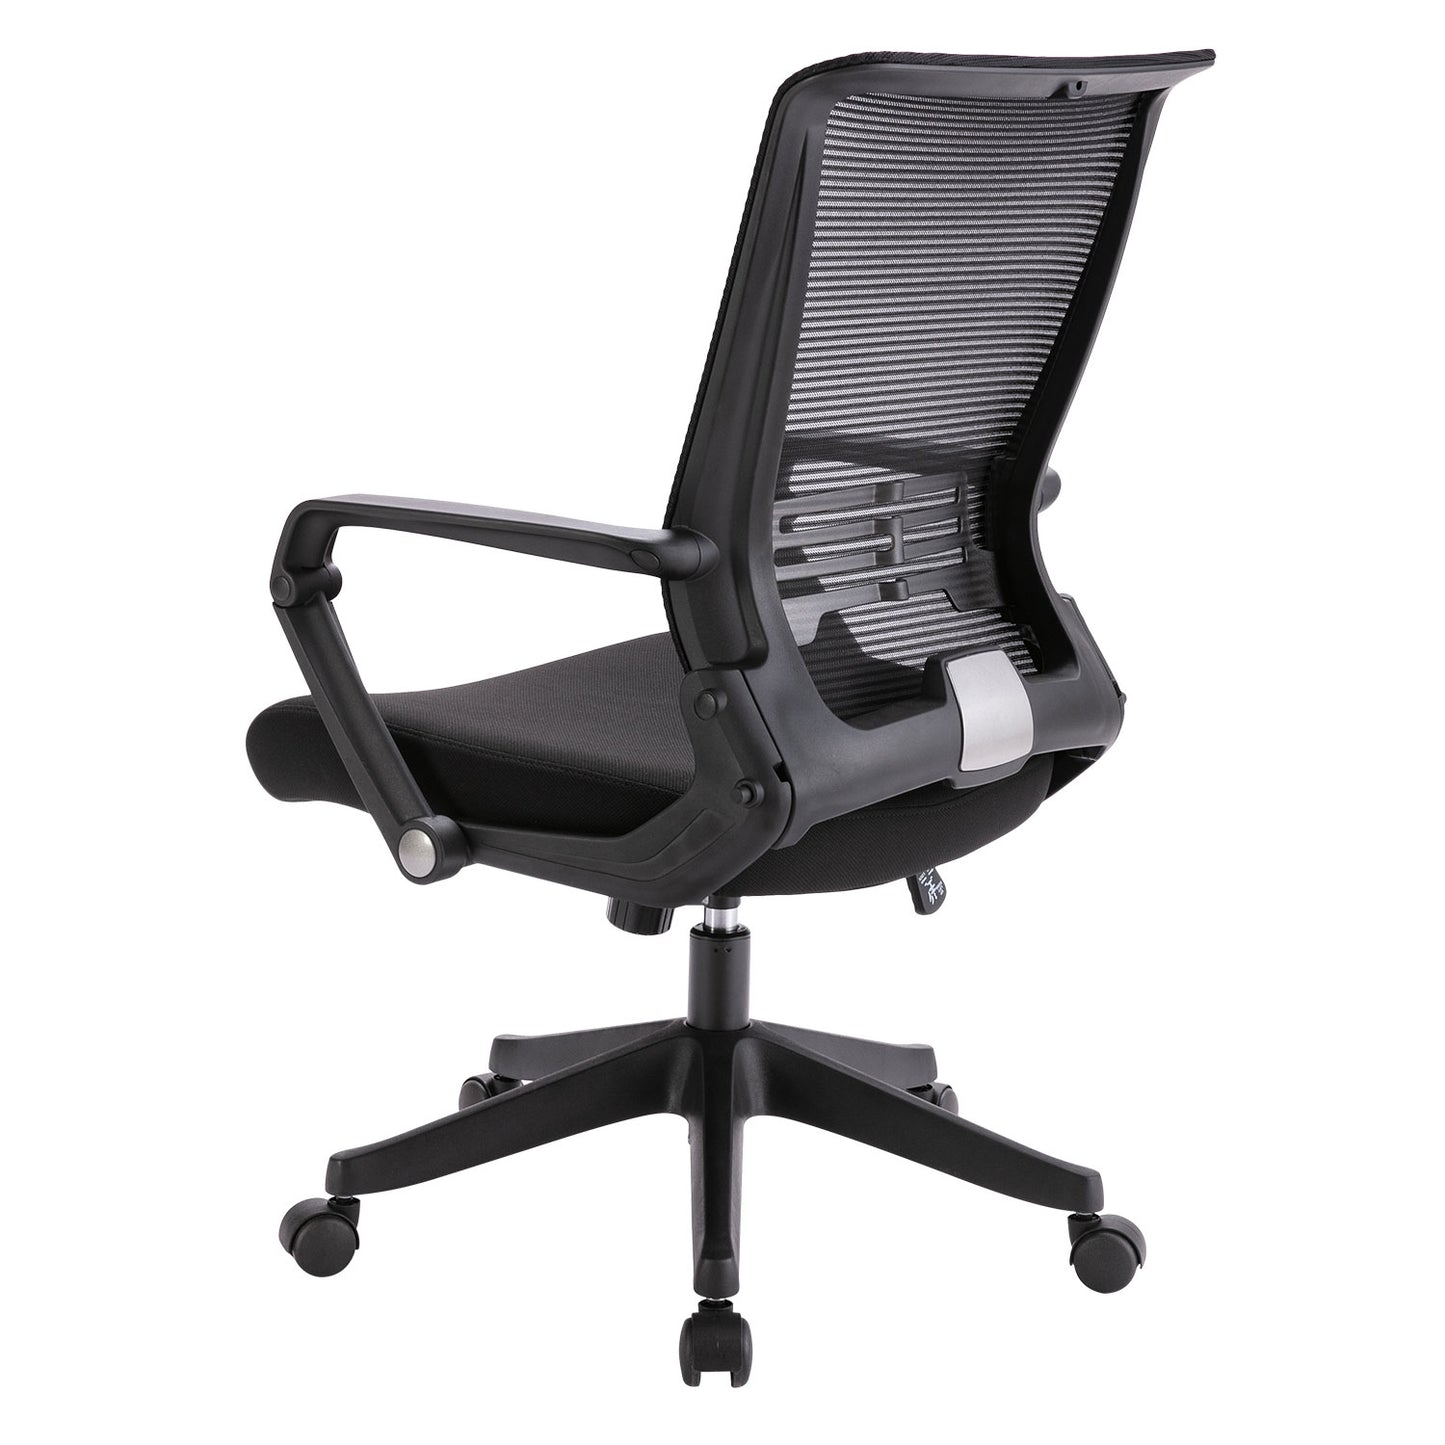 Mesh Office Chair, High Back Chair - Adjustable Headrest with Arms, Lumbar Support